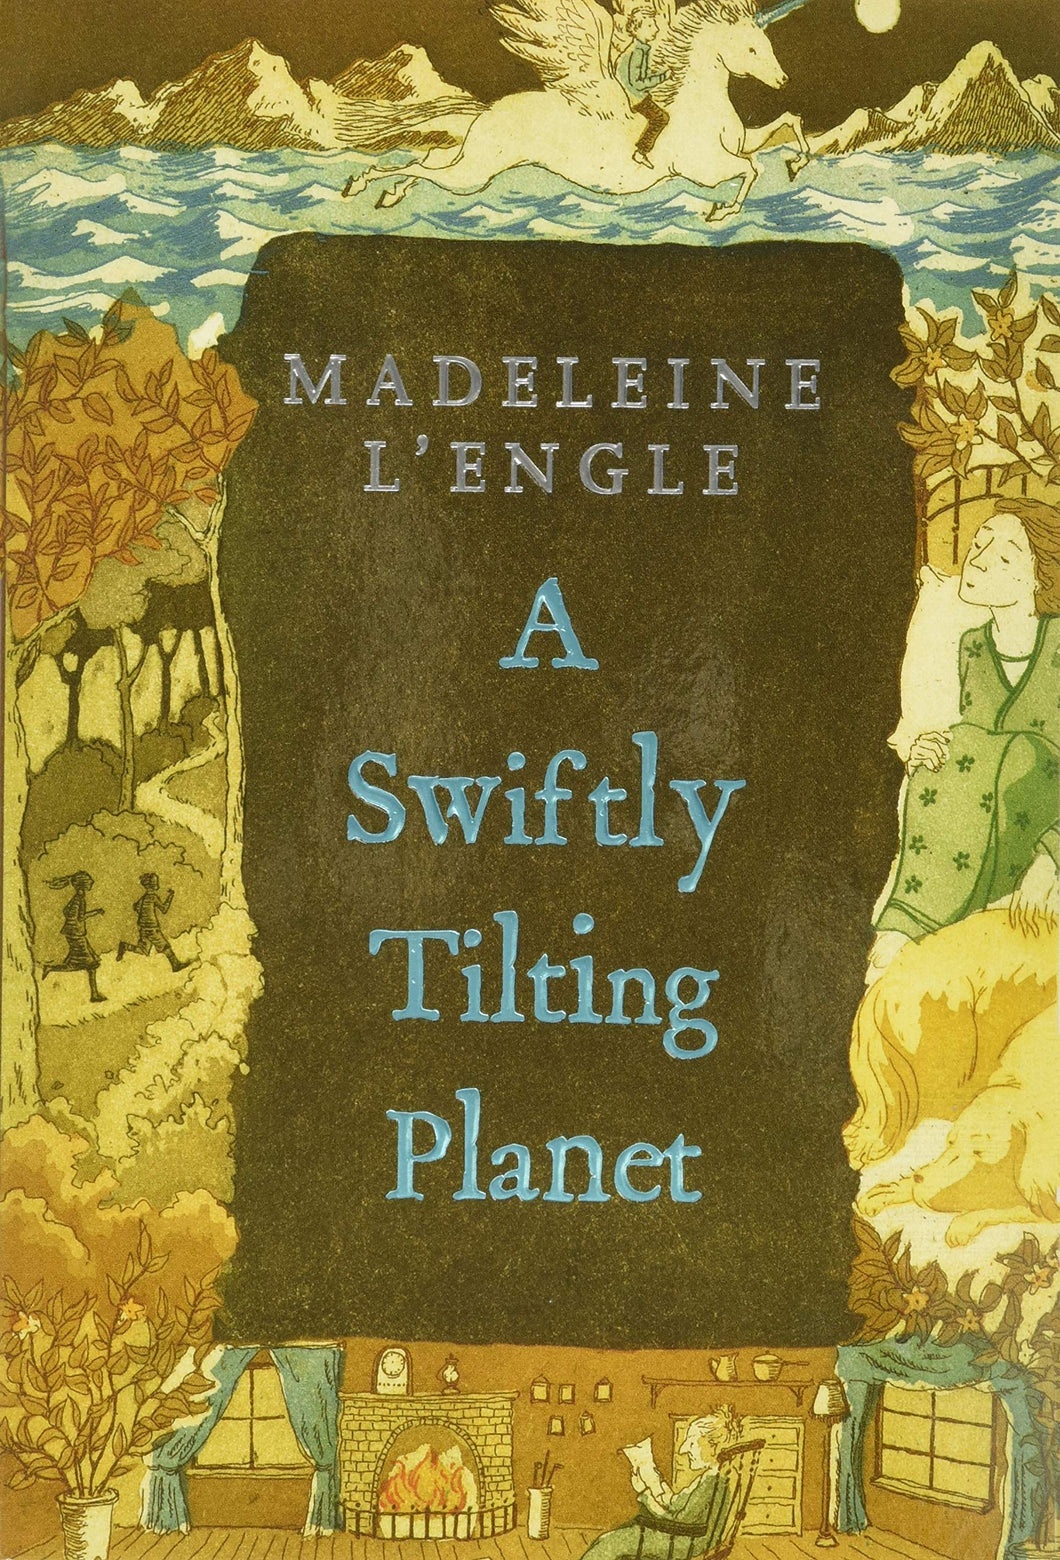 A Wrinkle in Time Quintet: A Swiftly Tilting Planet